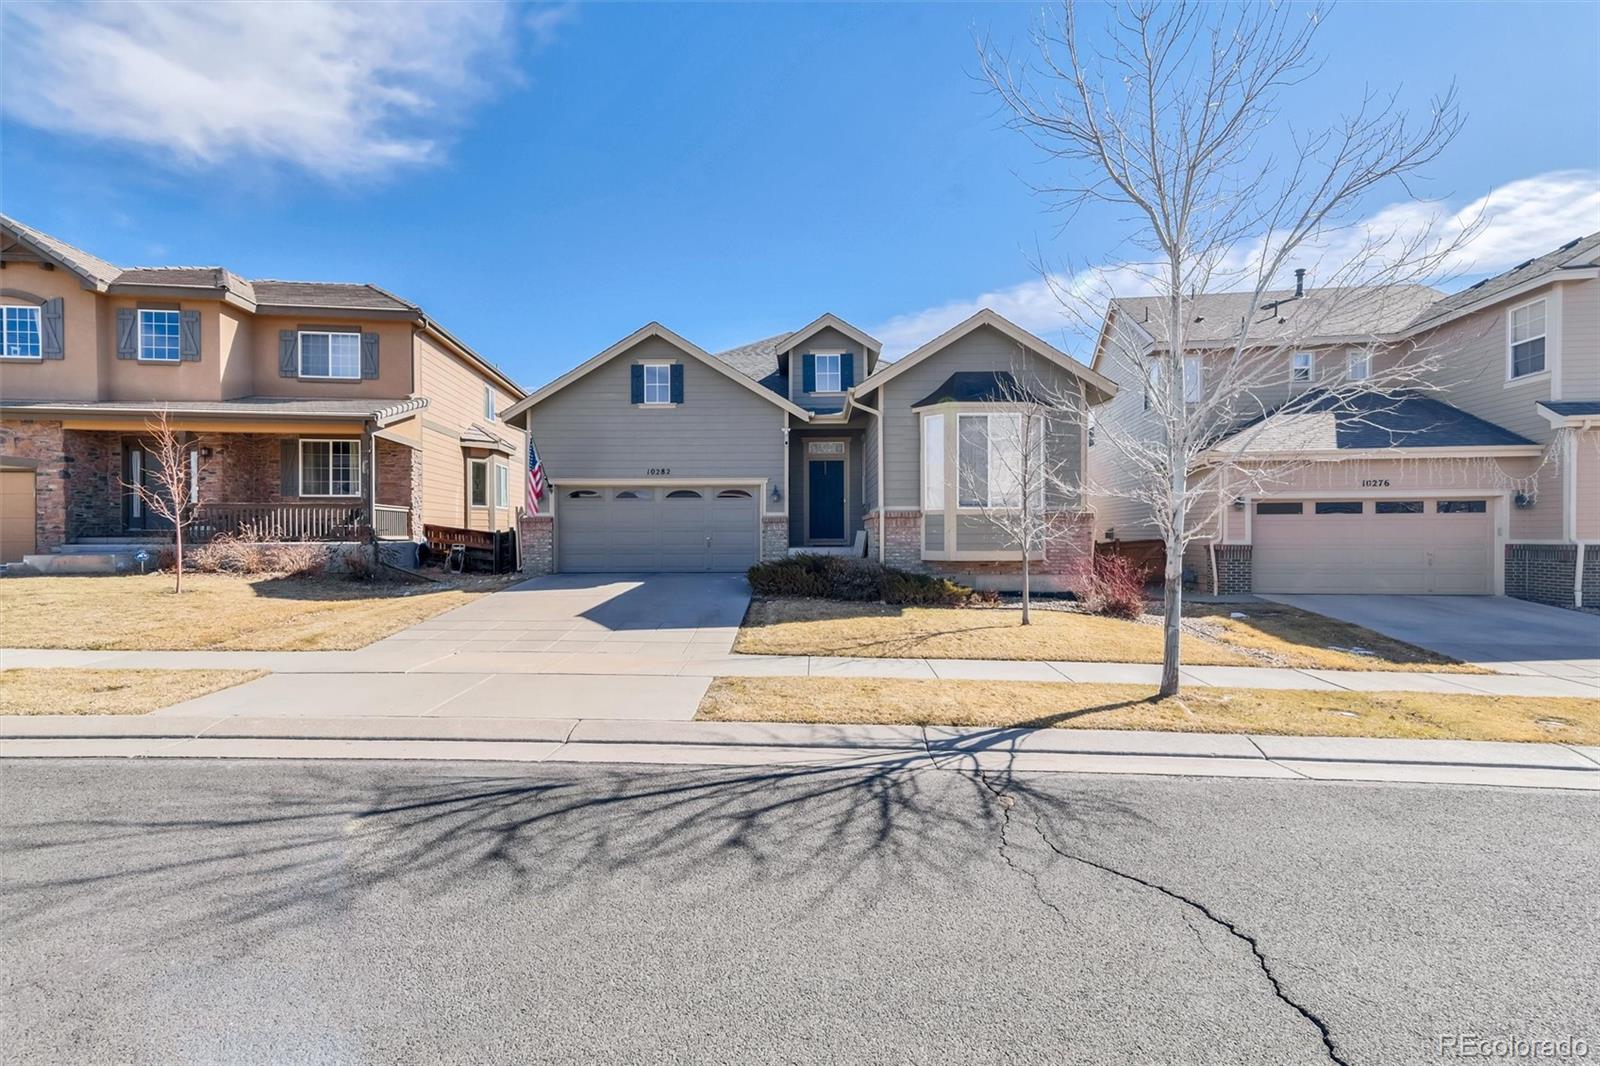 10282  sedalia street, commerce city sold home. Closed on 2024-05-03 for $560,000.